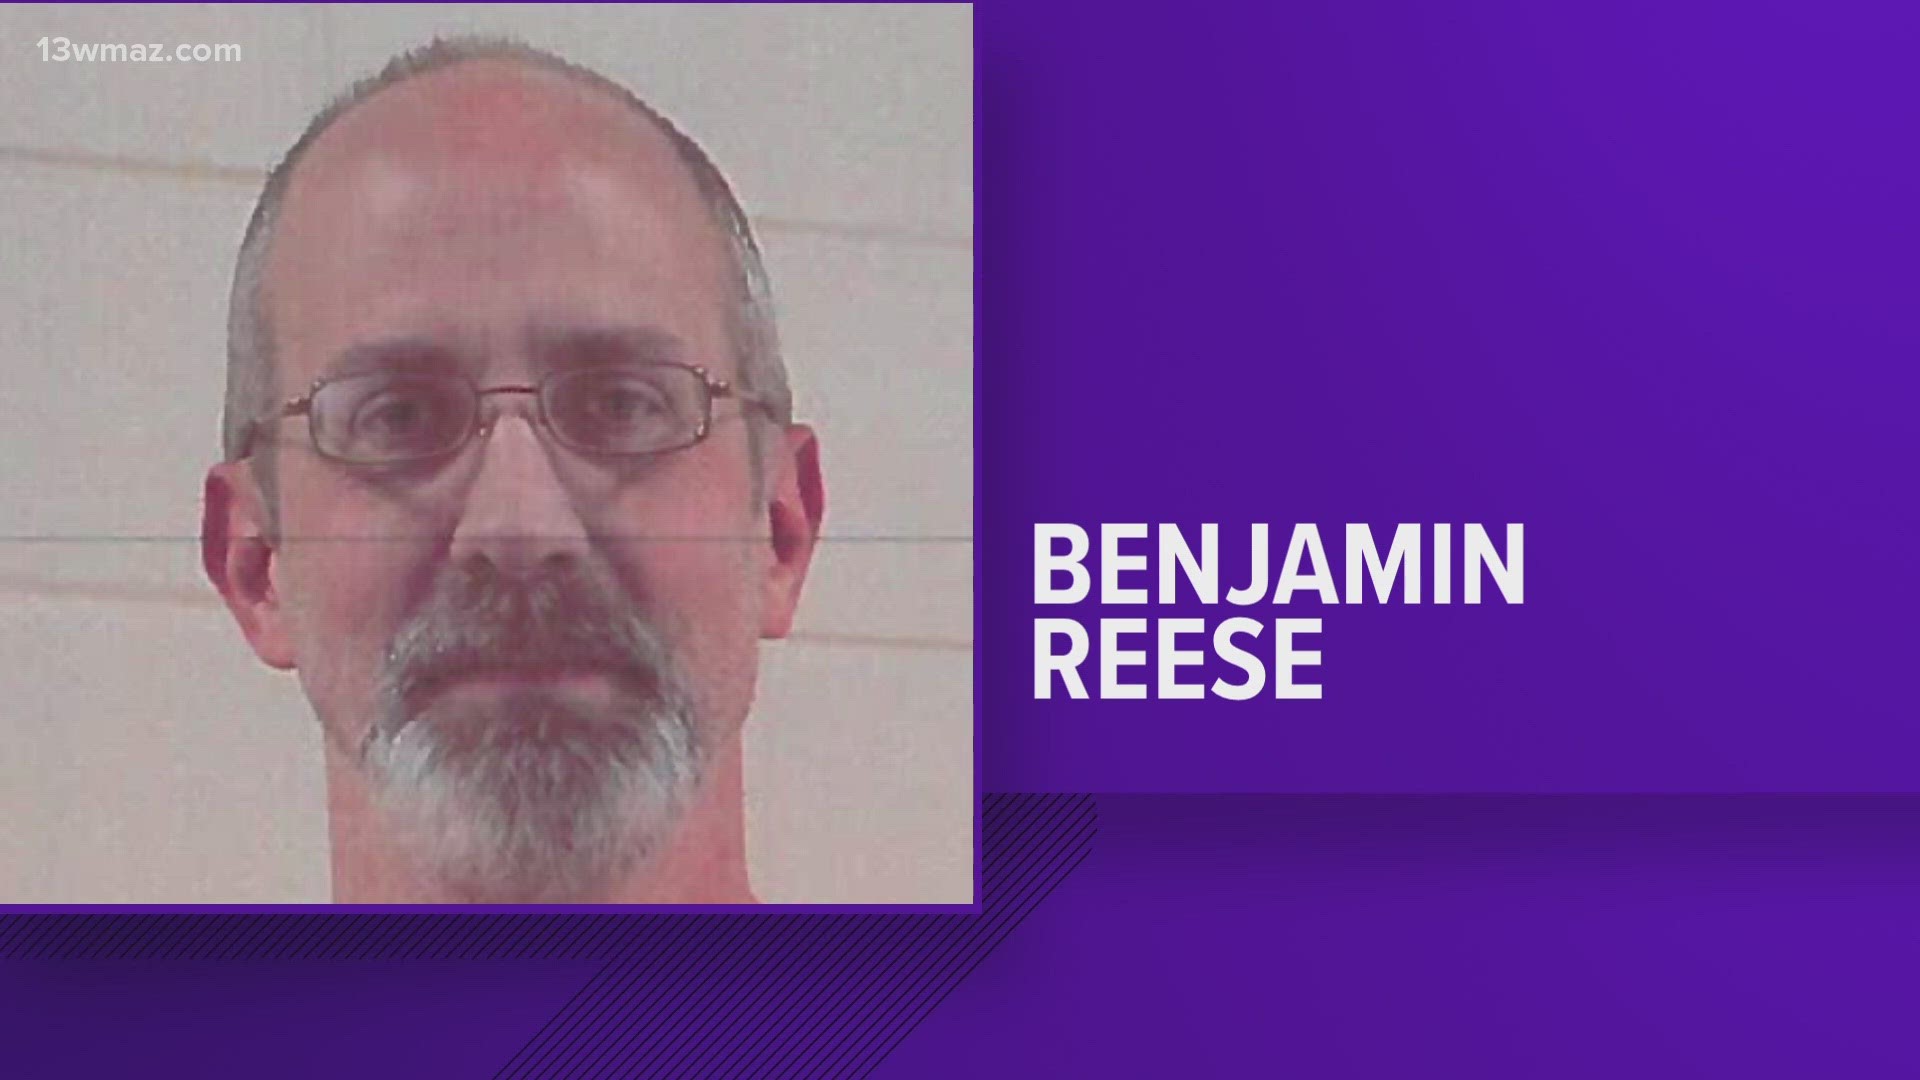 Benjamin Reese's bond was set at $2,500 for the terroristic threat charge and $5,000 for the charge of cruelty to children. Reese has since bonded out.